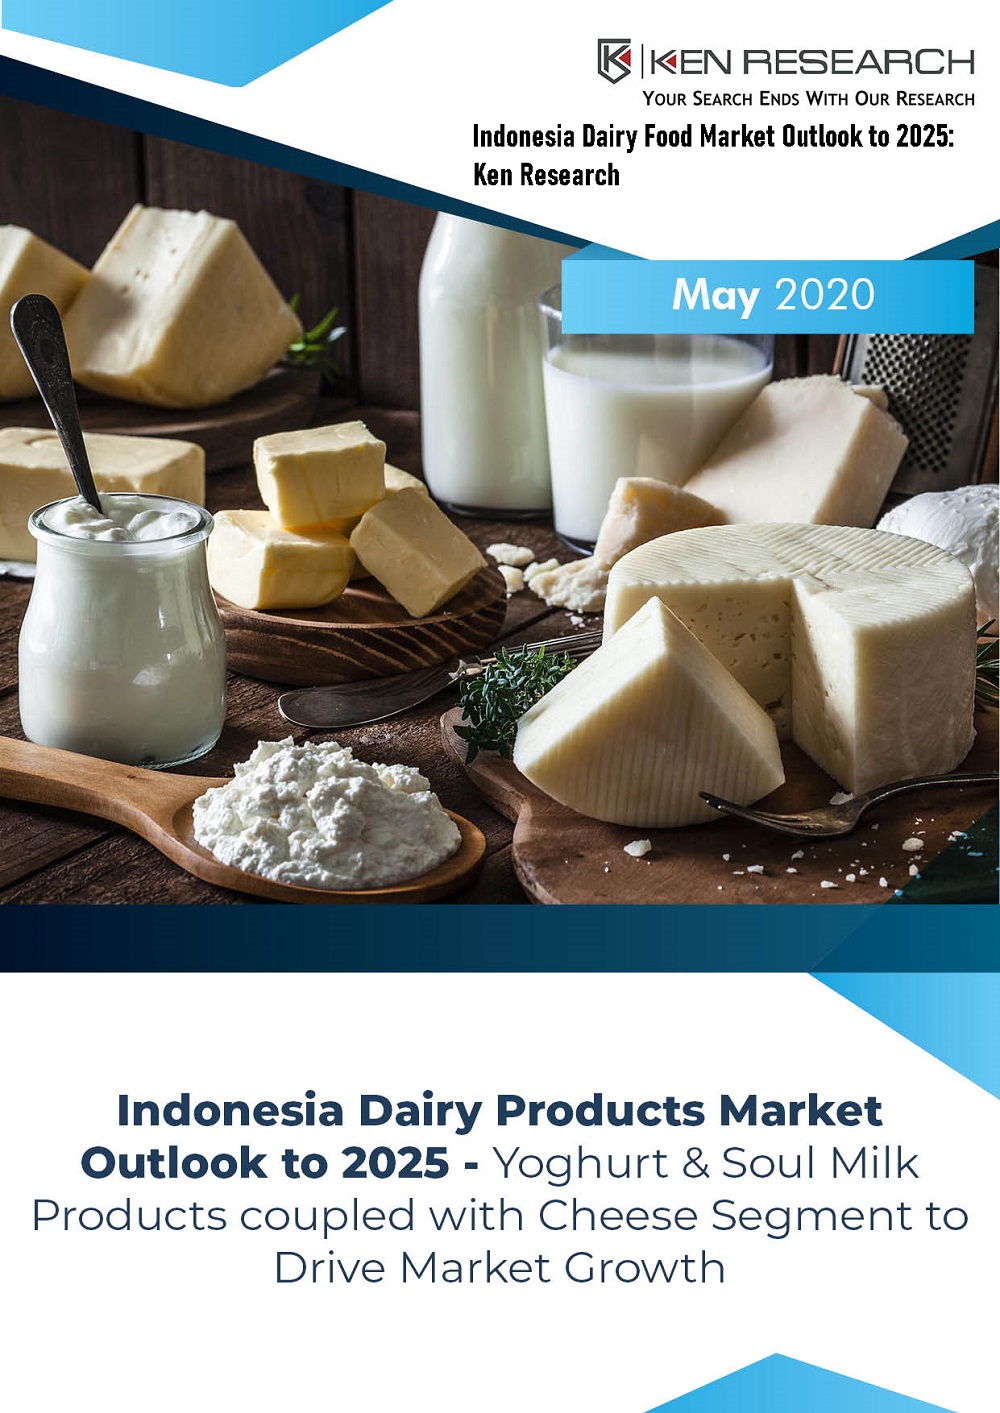 Indonesia Dairy Food Industry